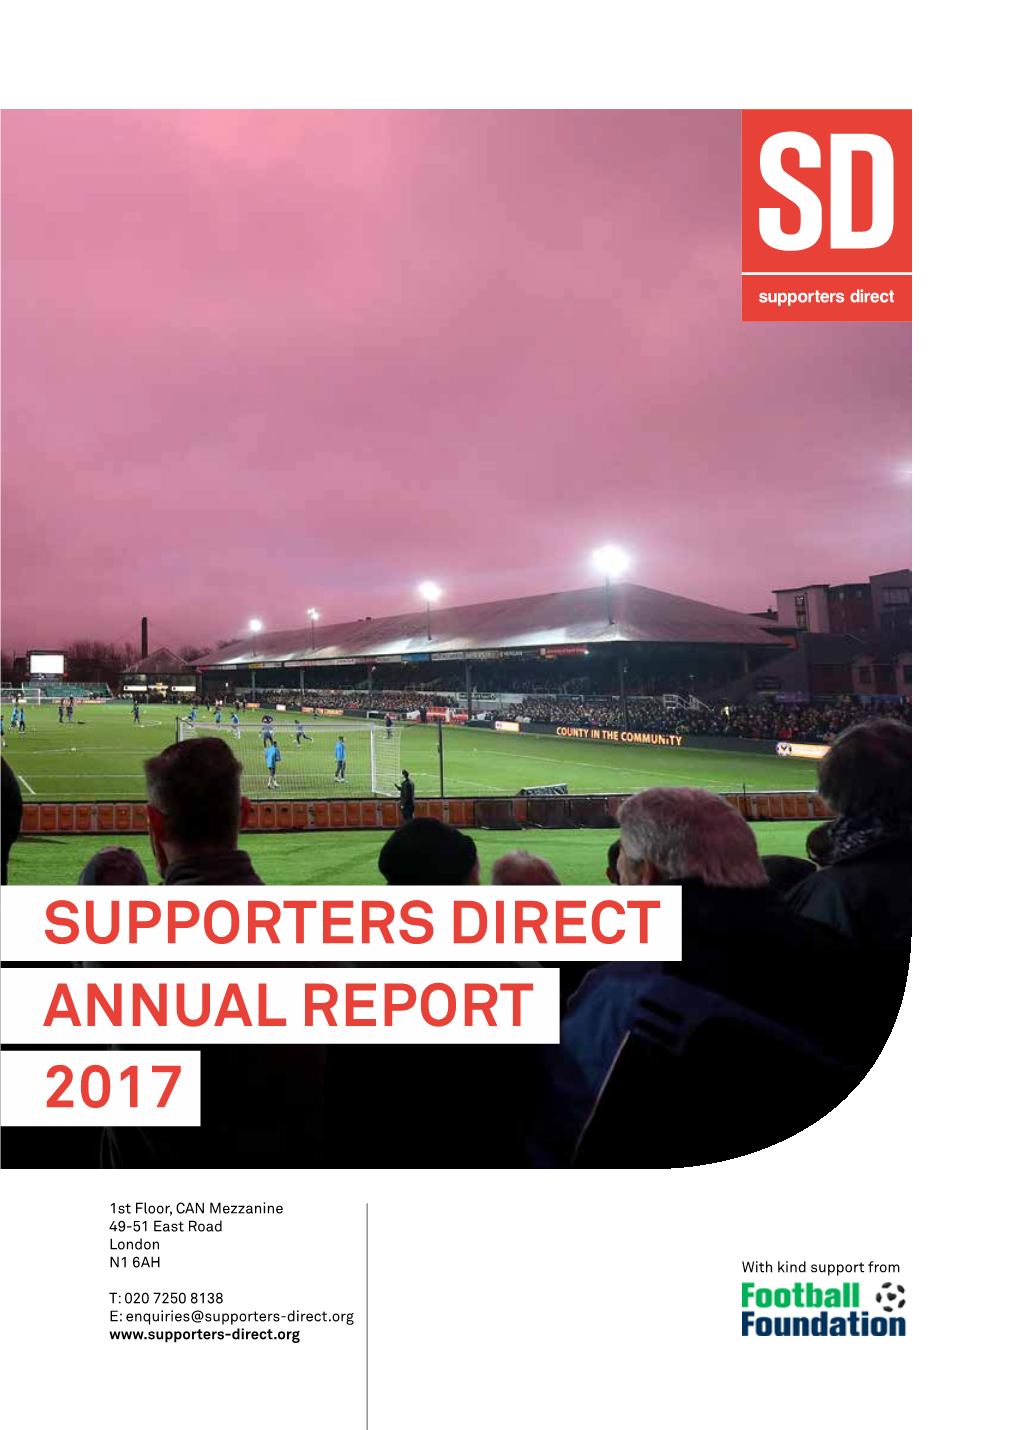 Annual Report Supporters Direct 2017